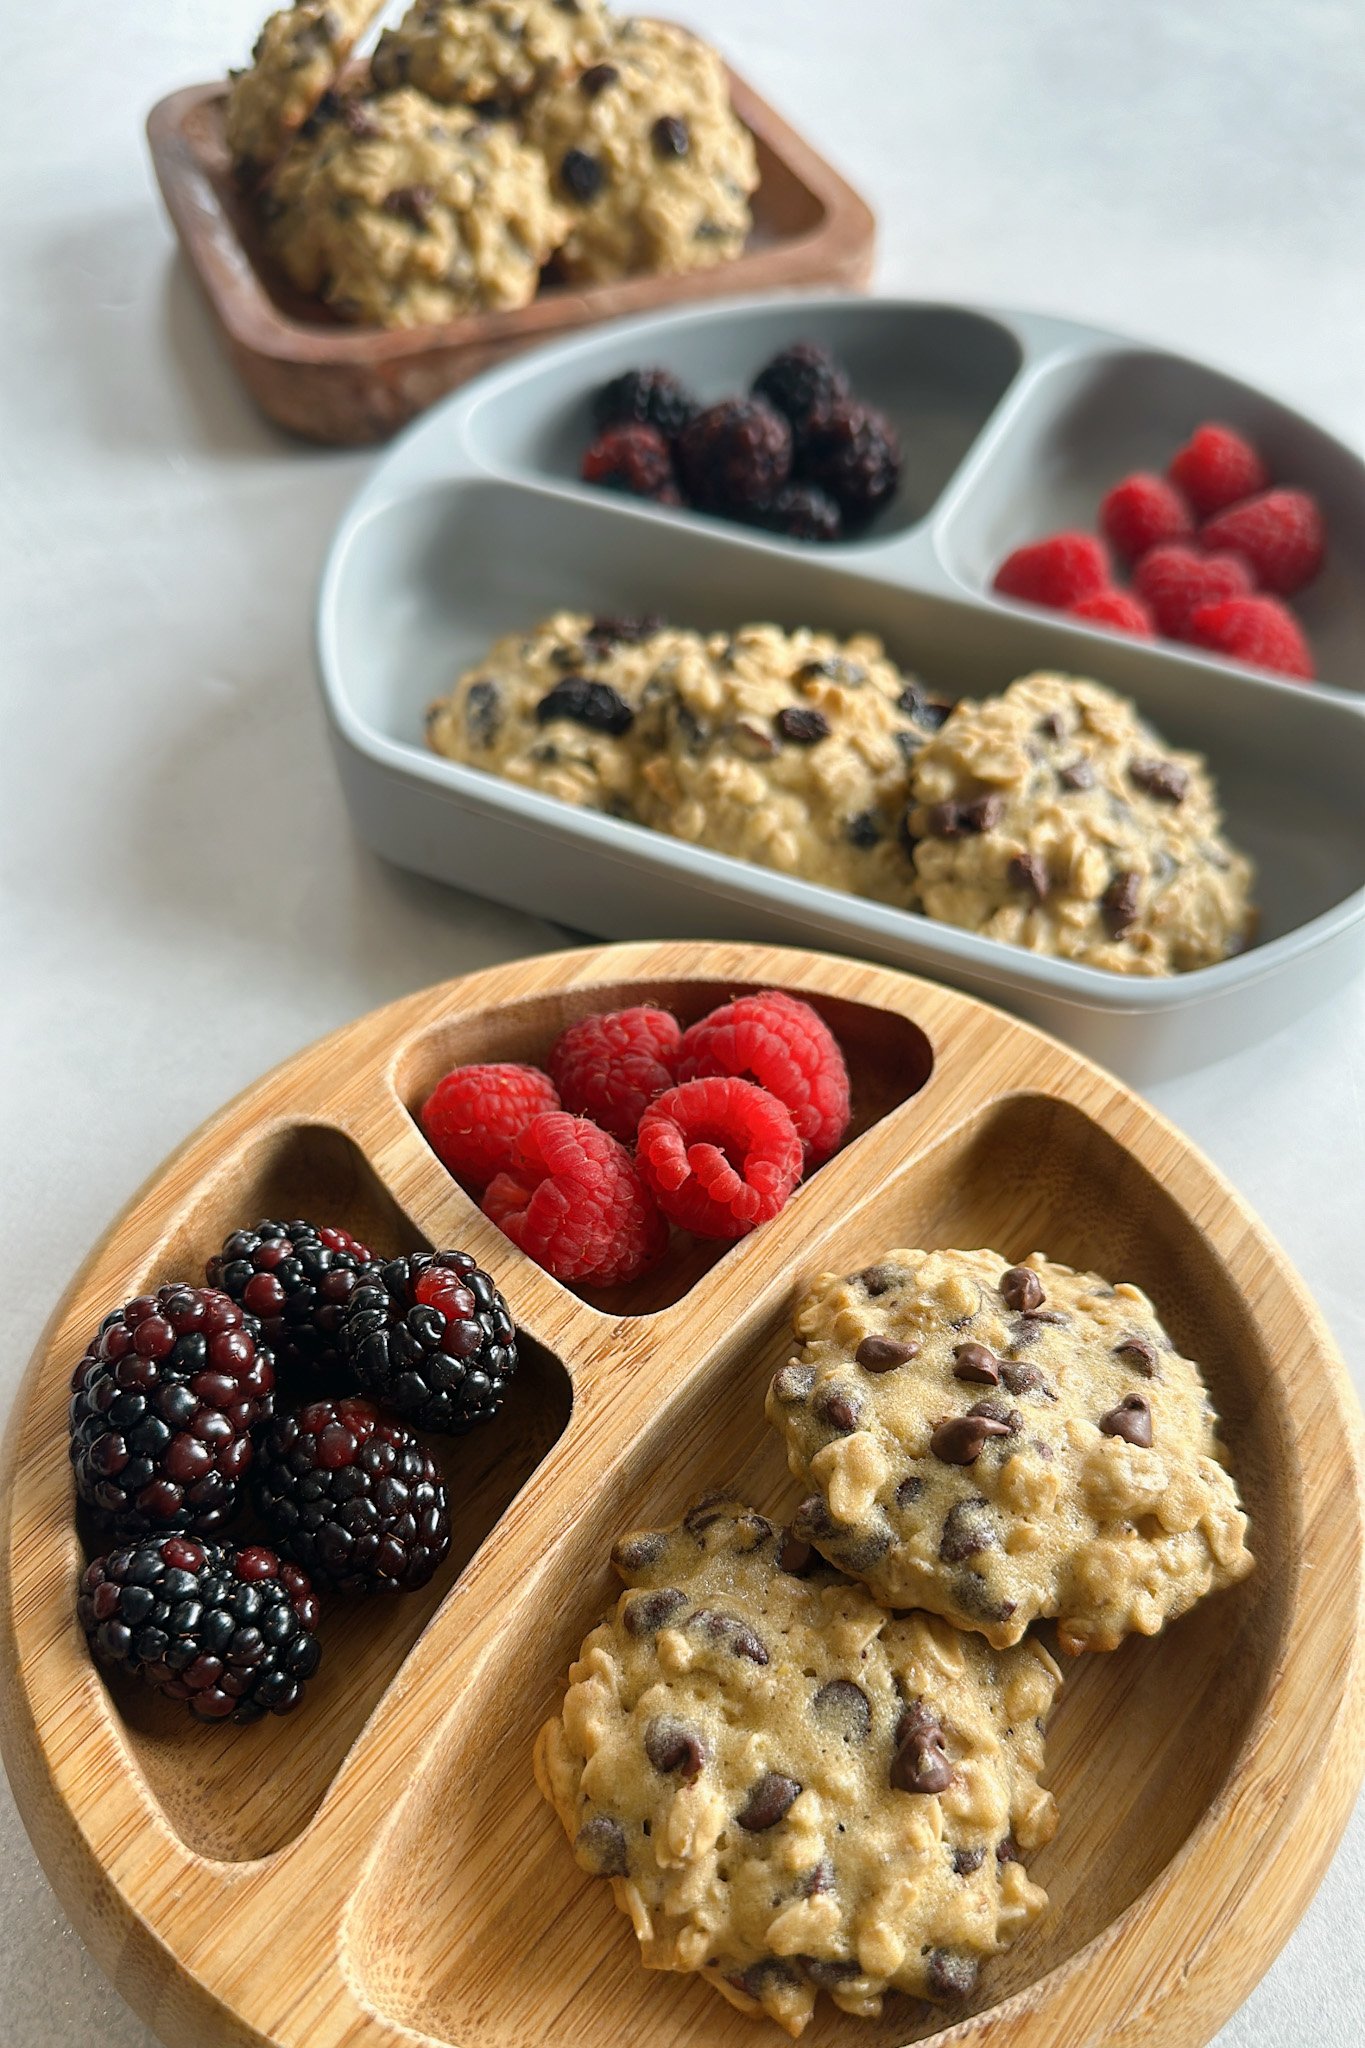 Maple oatmeal cookies served with berries.